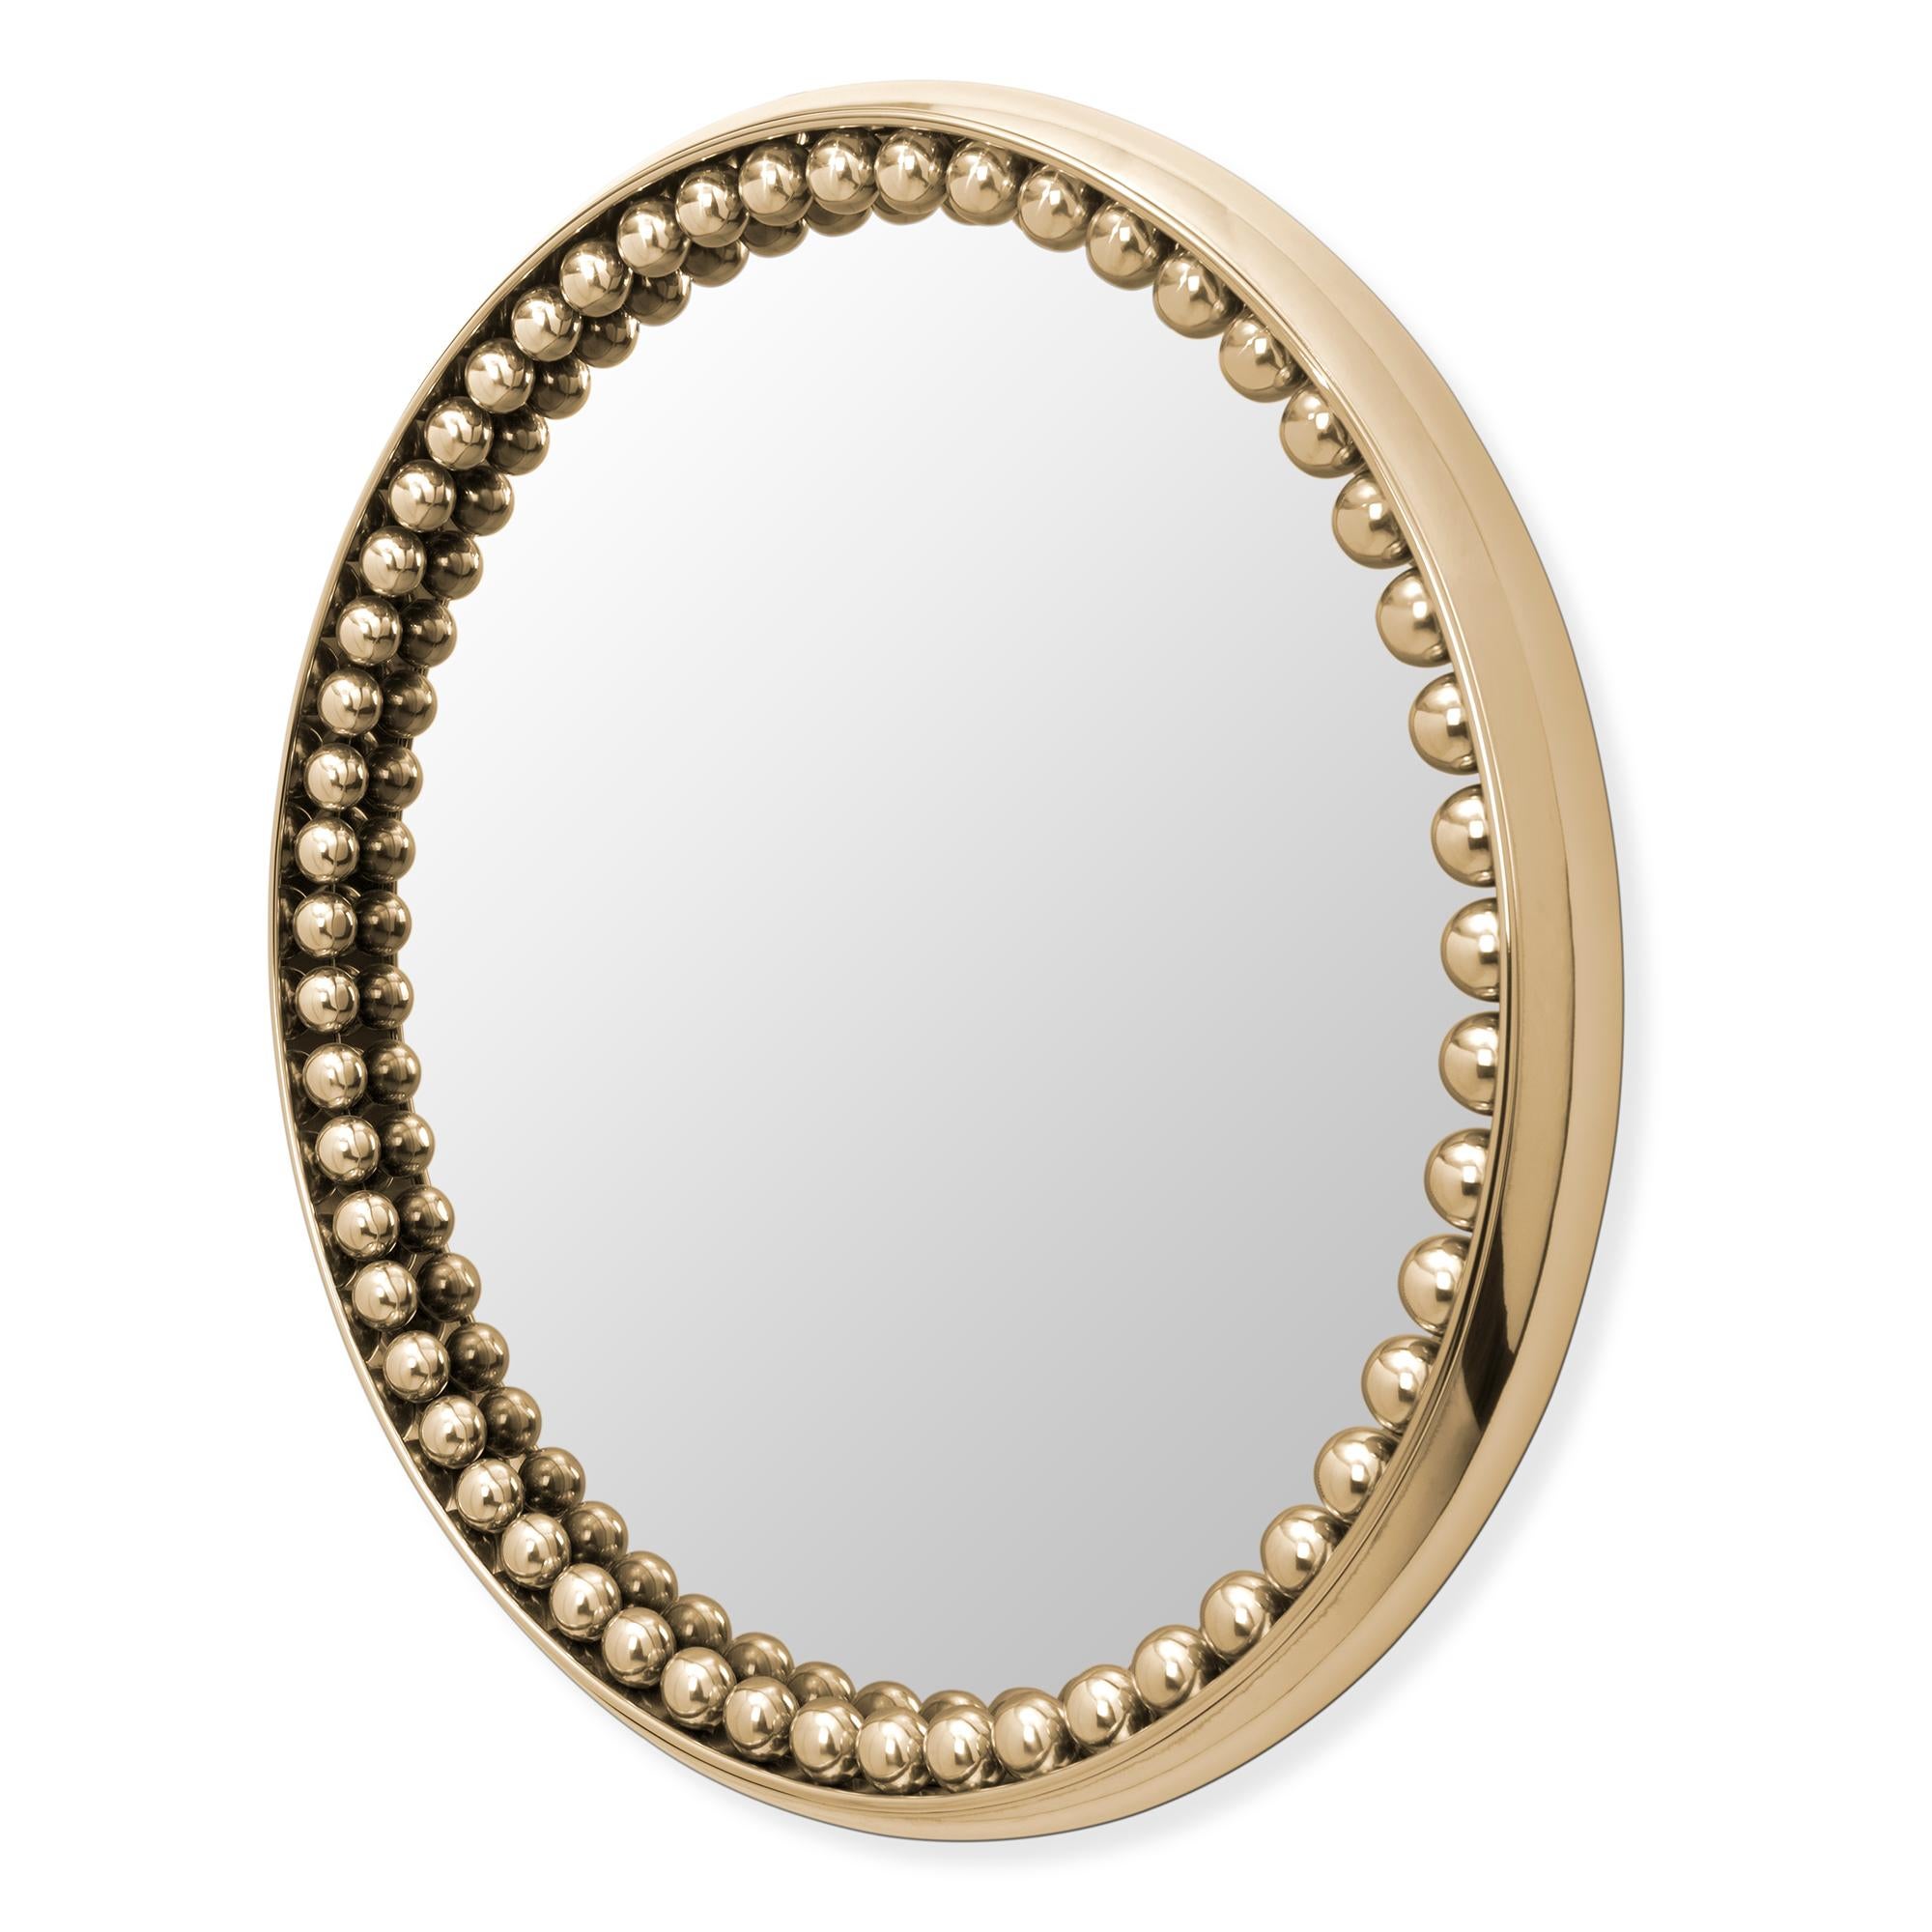 Mirror spheres round with polished
brass frame and with flat mirror glass.
Also available in spheres rectangular mirror.